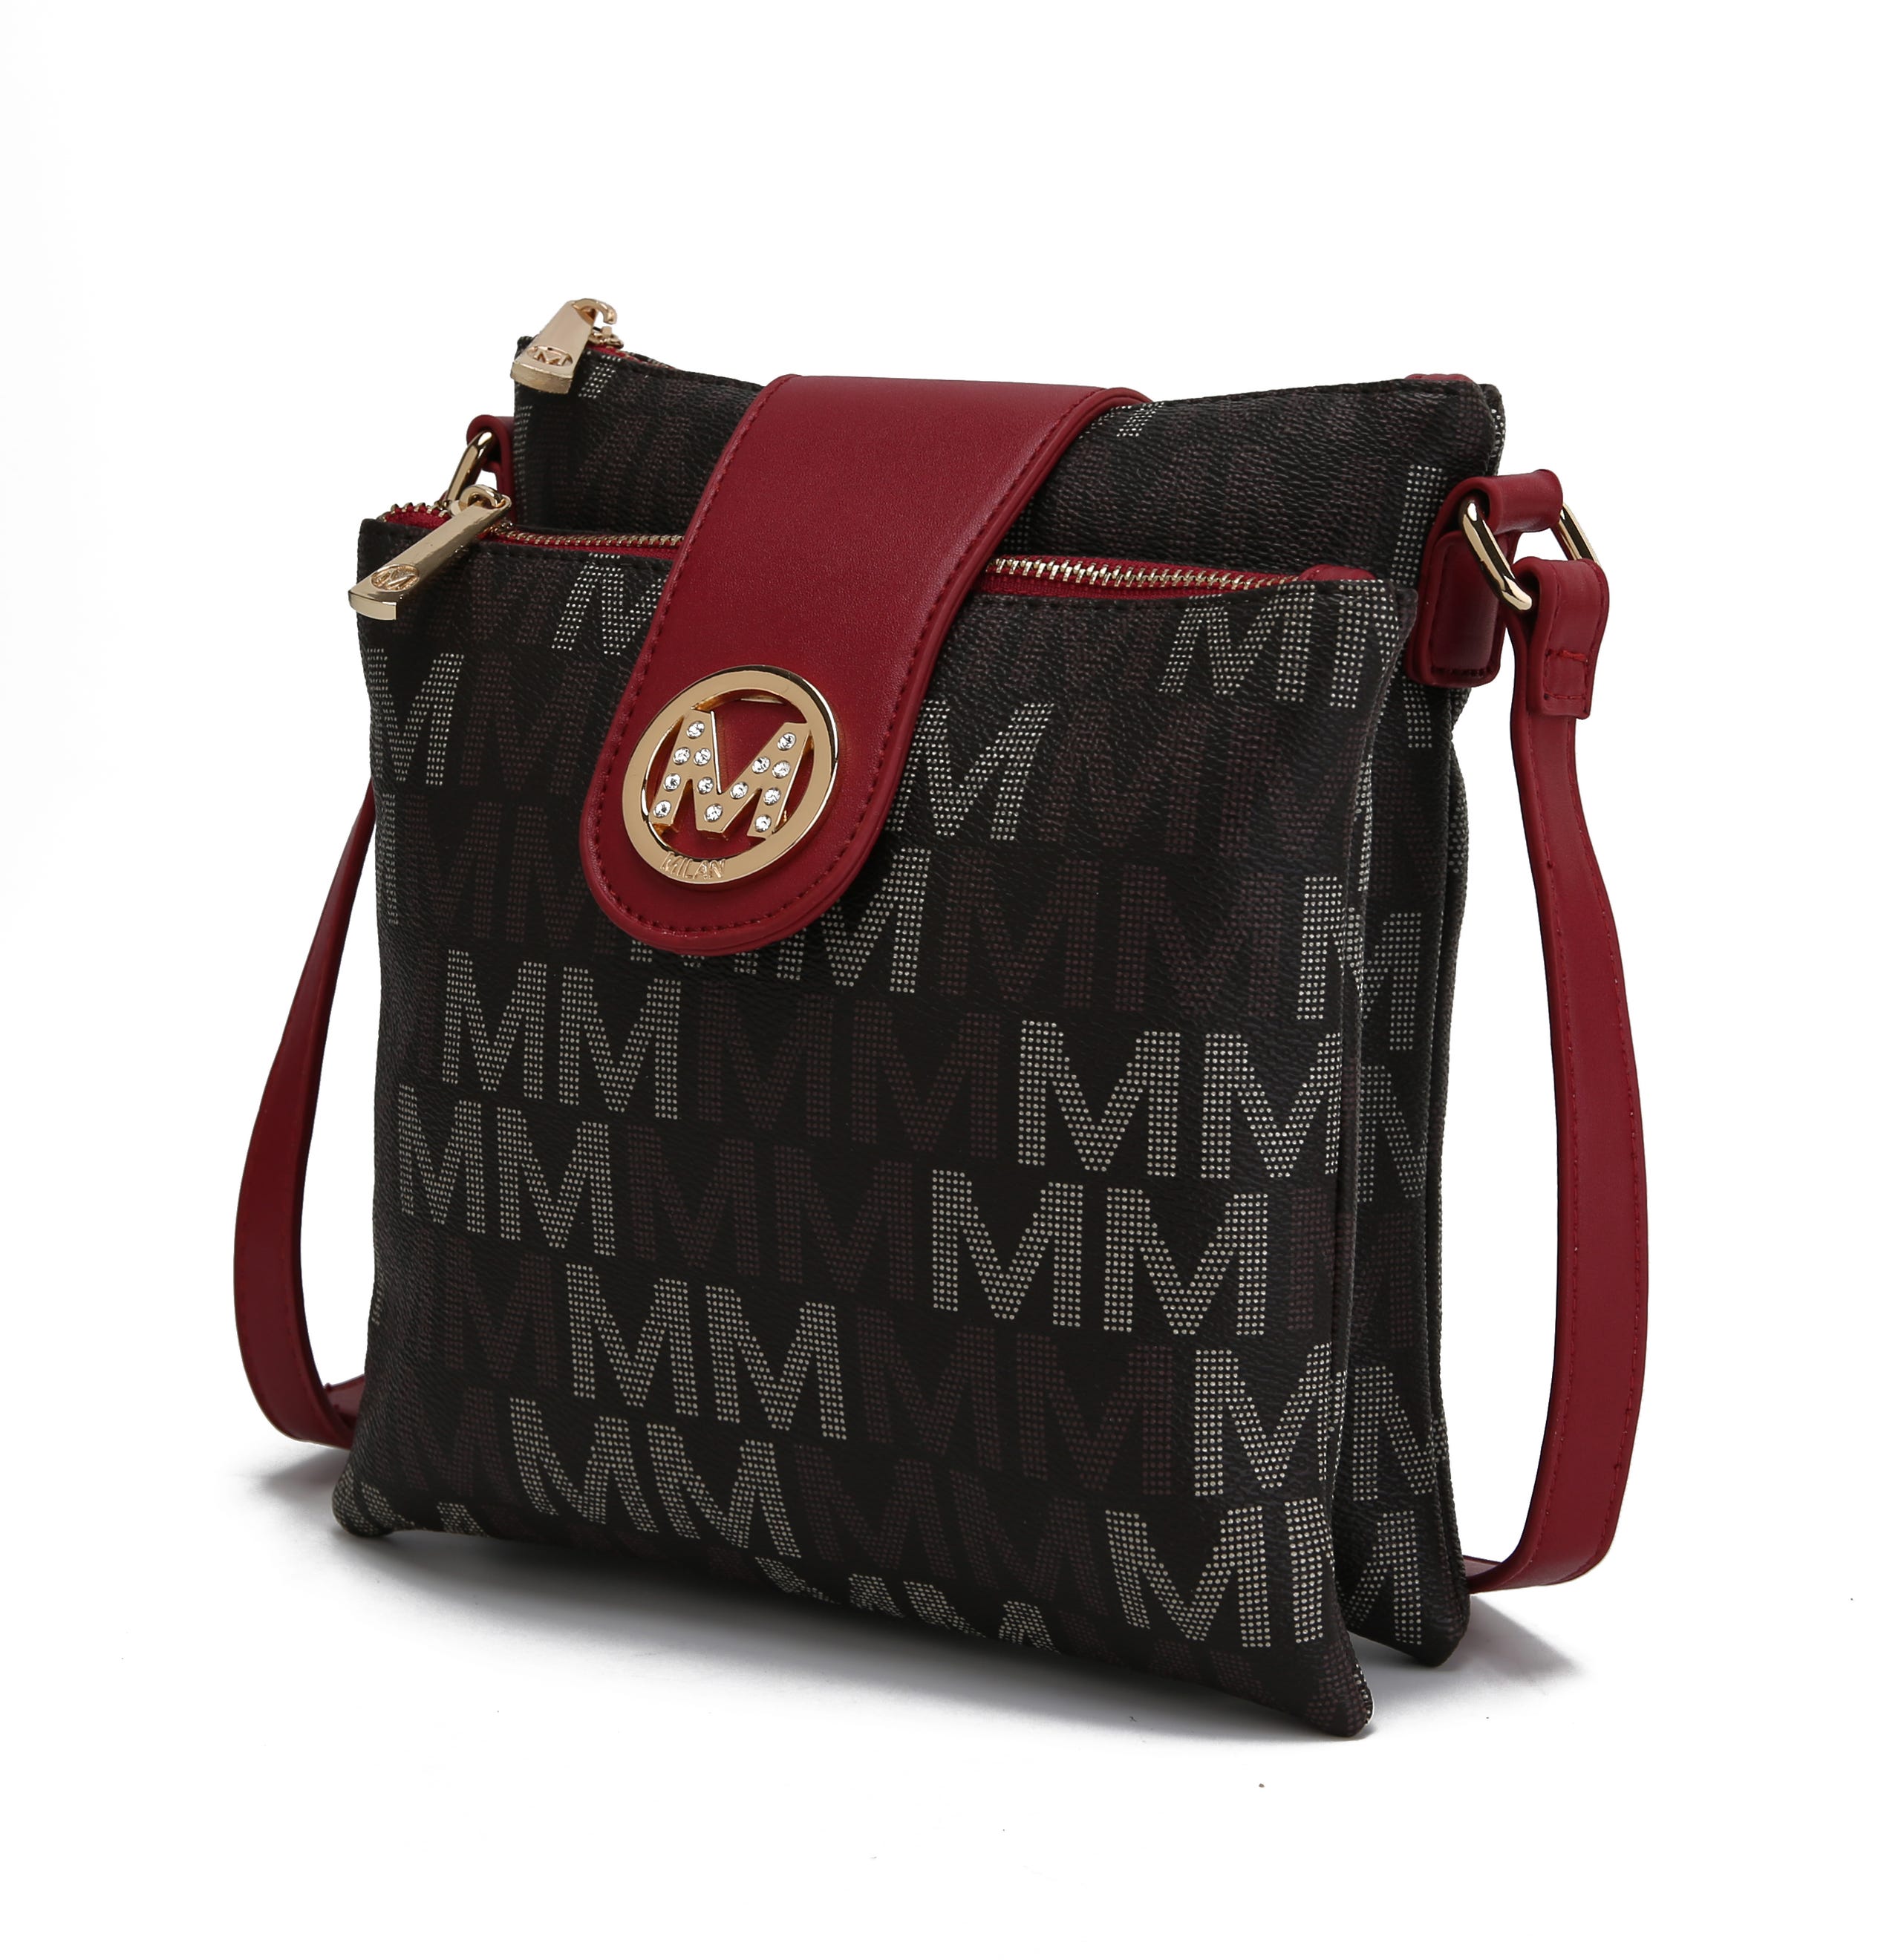 Black and brown patterned shoulder bag with red accents and a circular metallic logo.